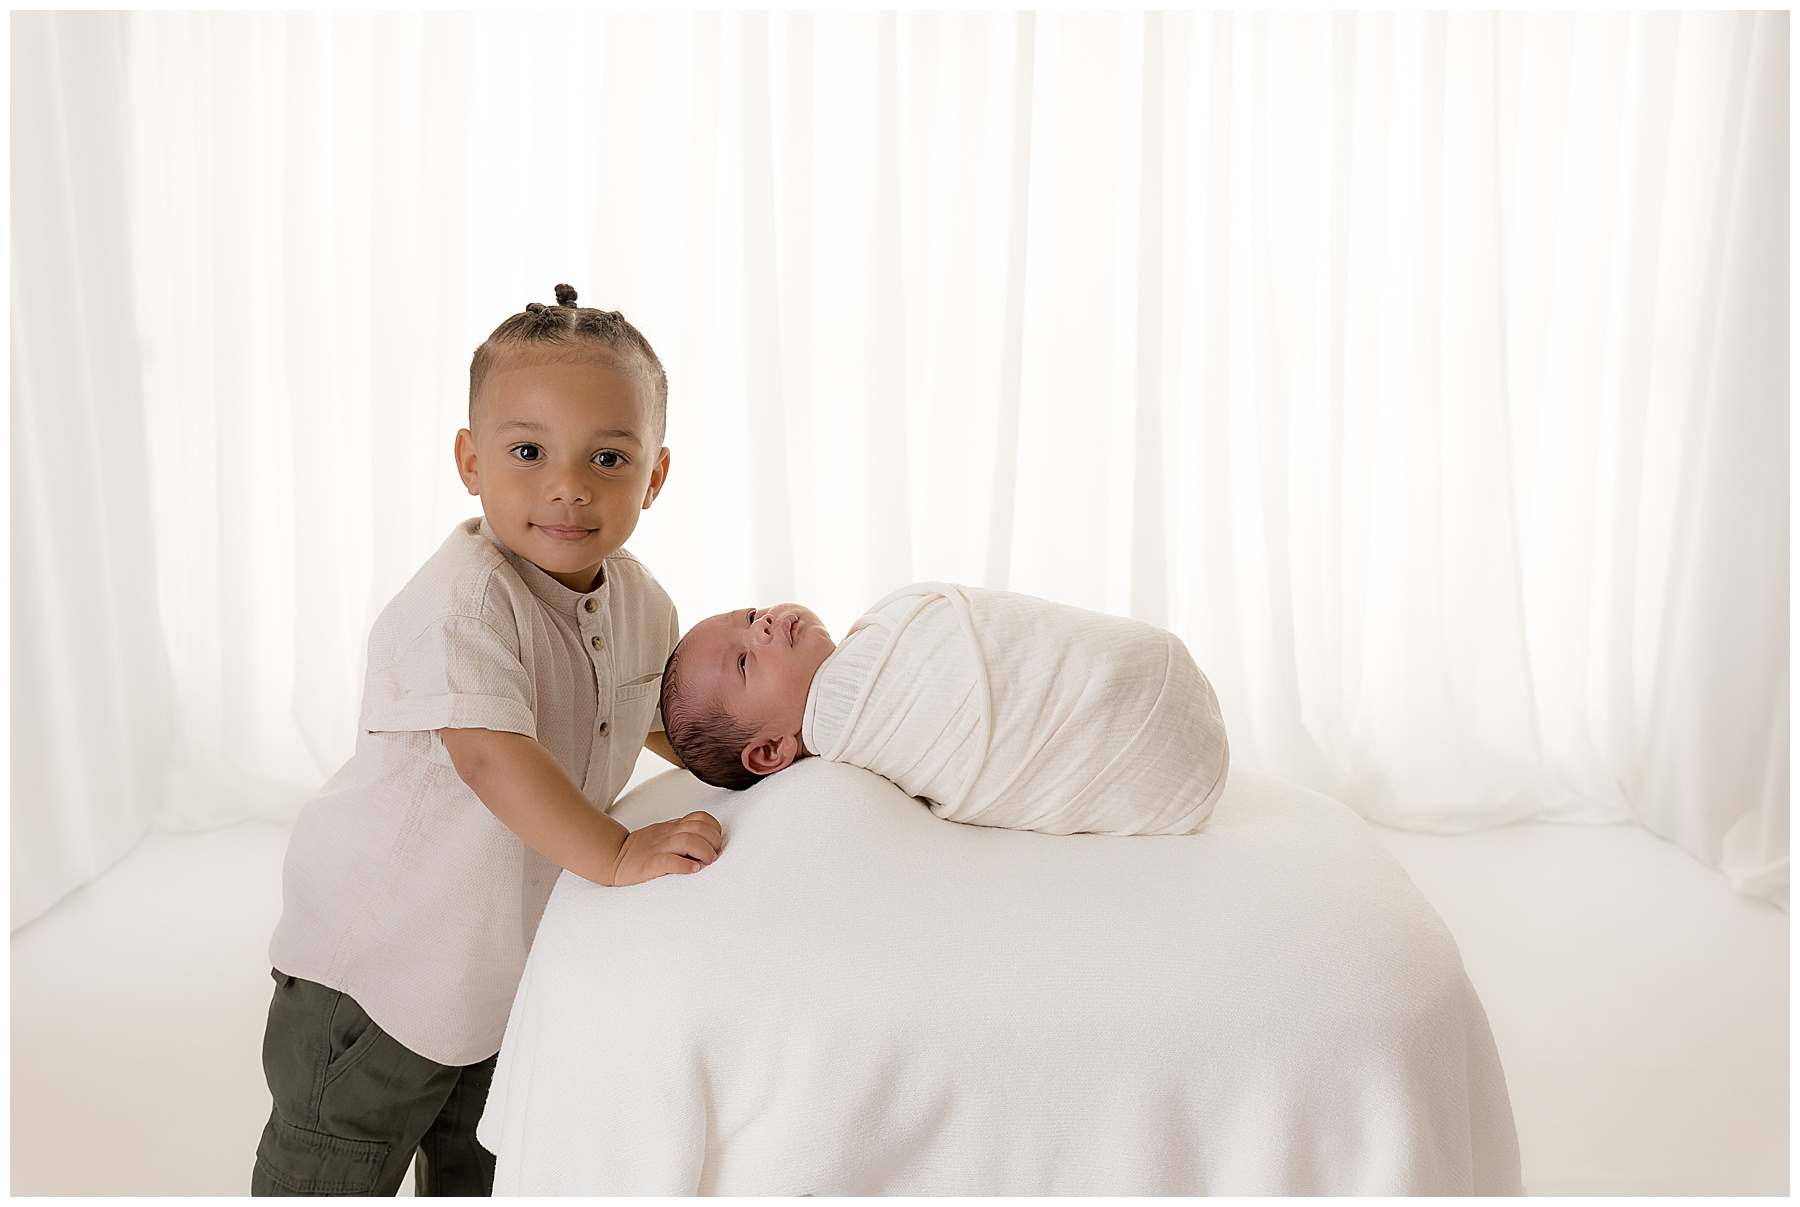 A toddler and a newborn photographed together in a white room.